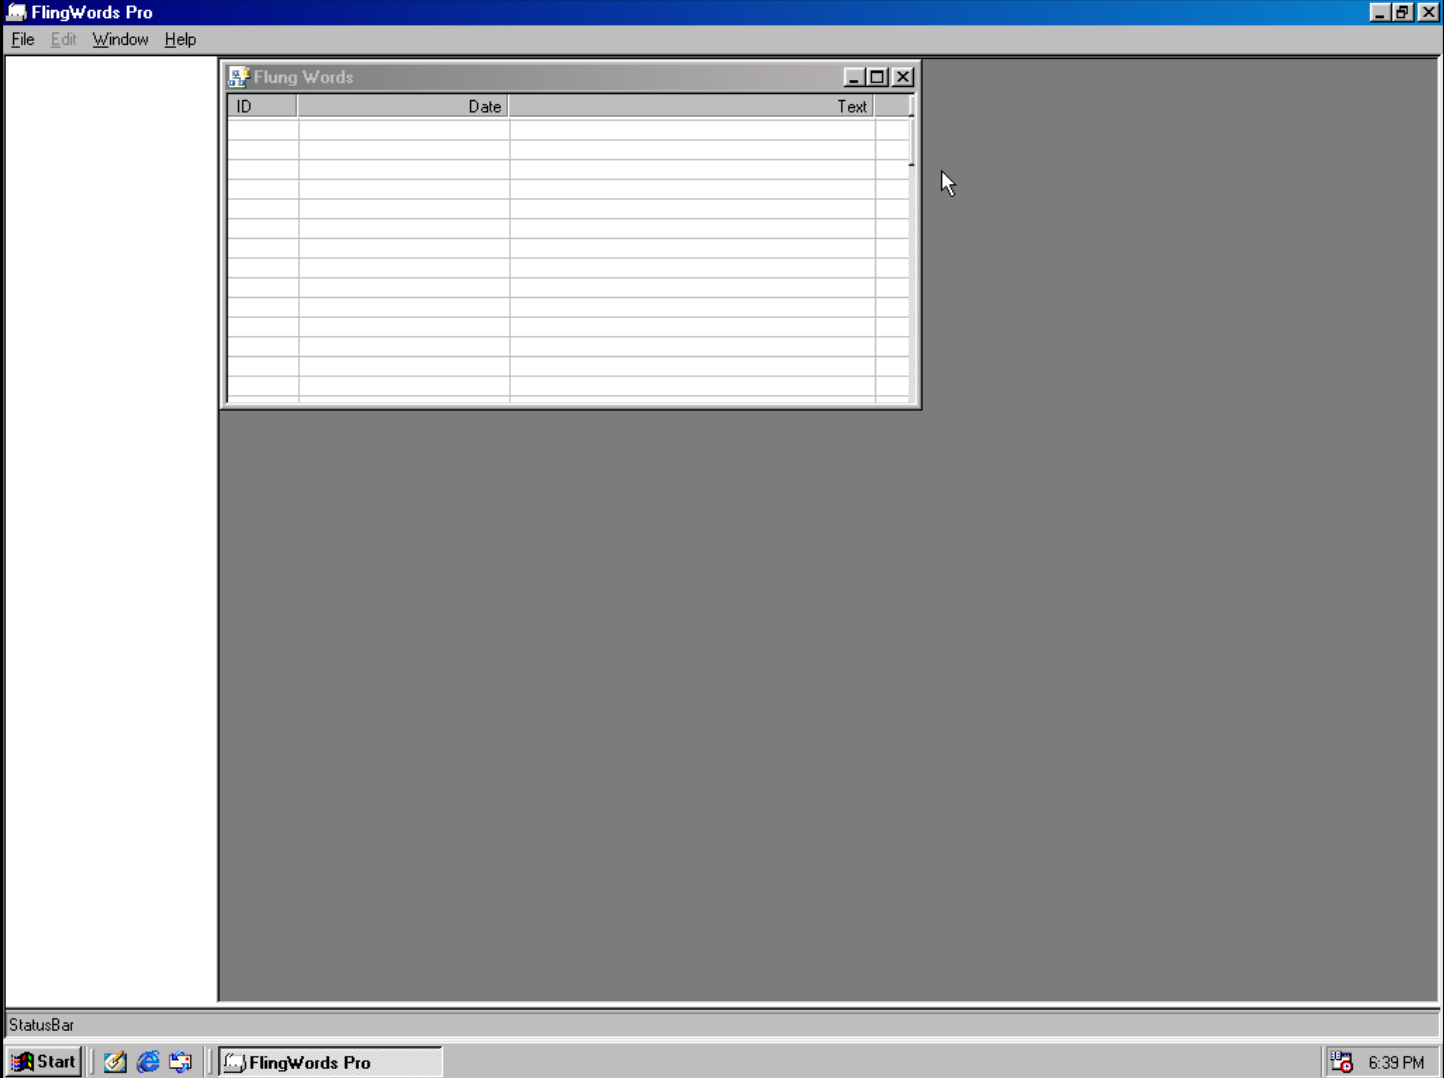 Running under Windows 98 - note how the data is not displayed